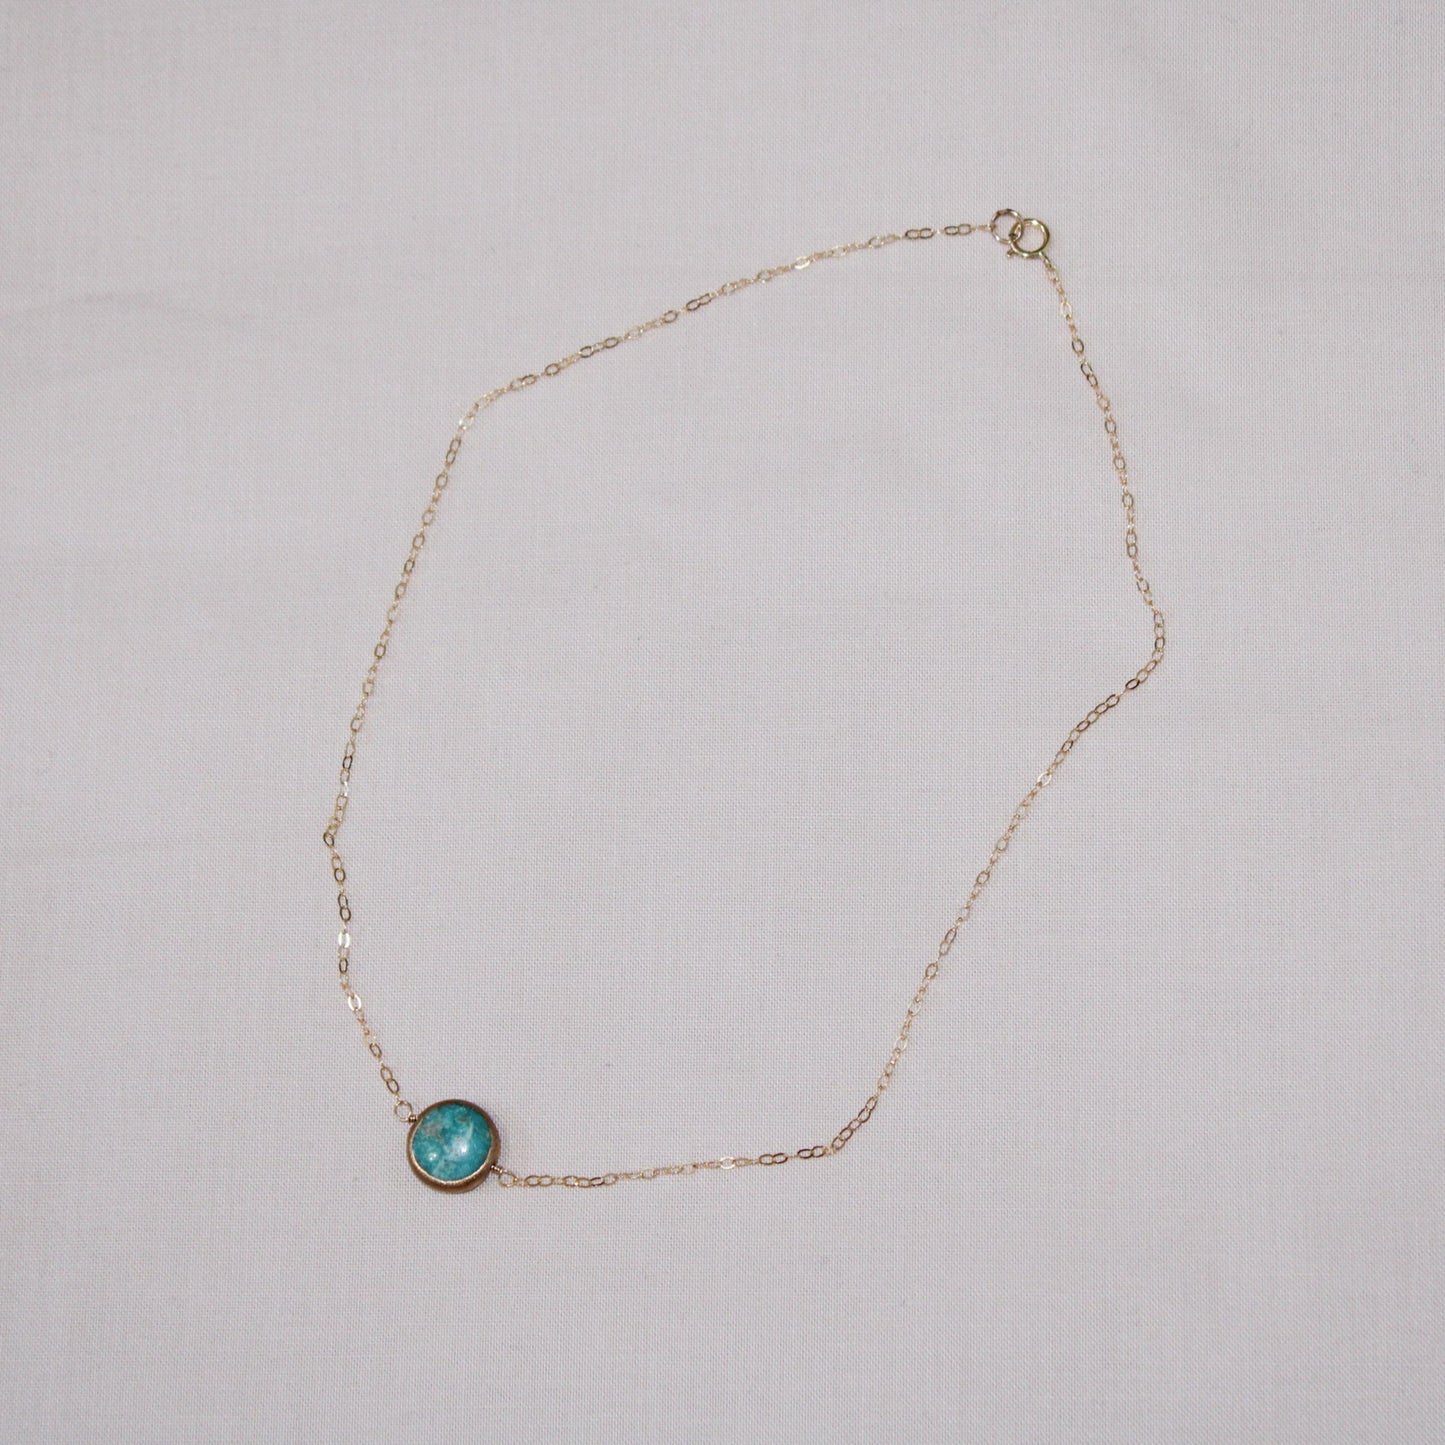 Turquoise Coin Necklace